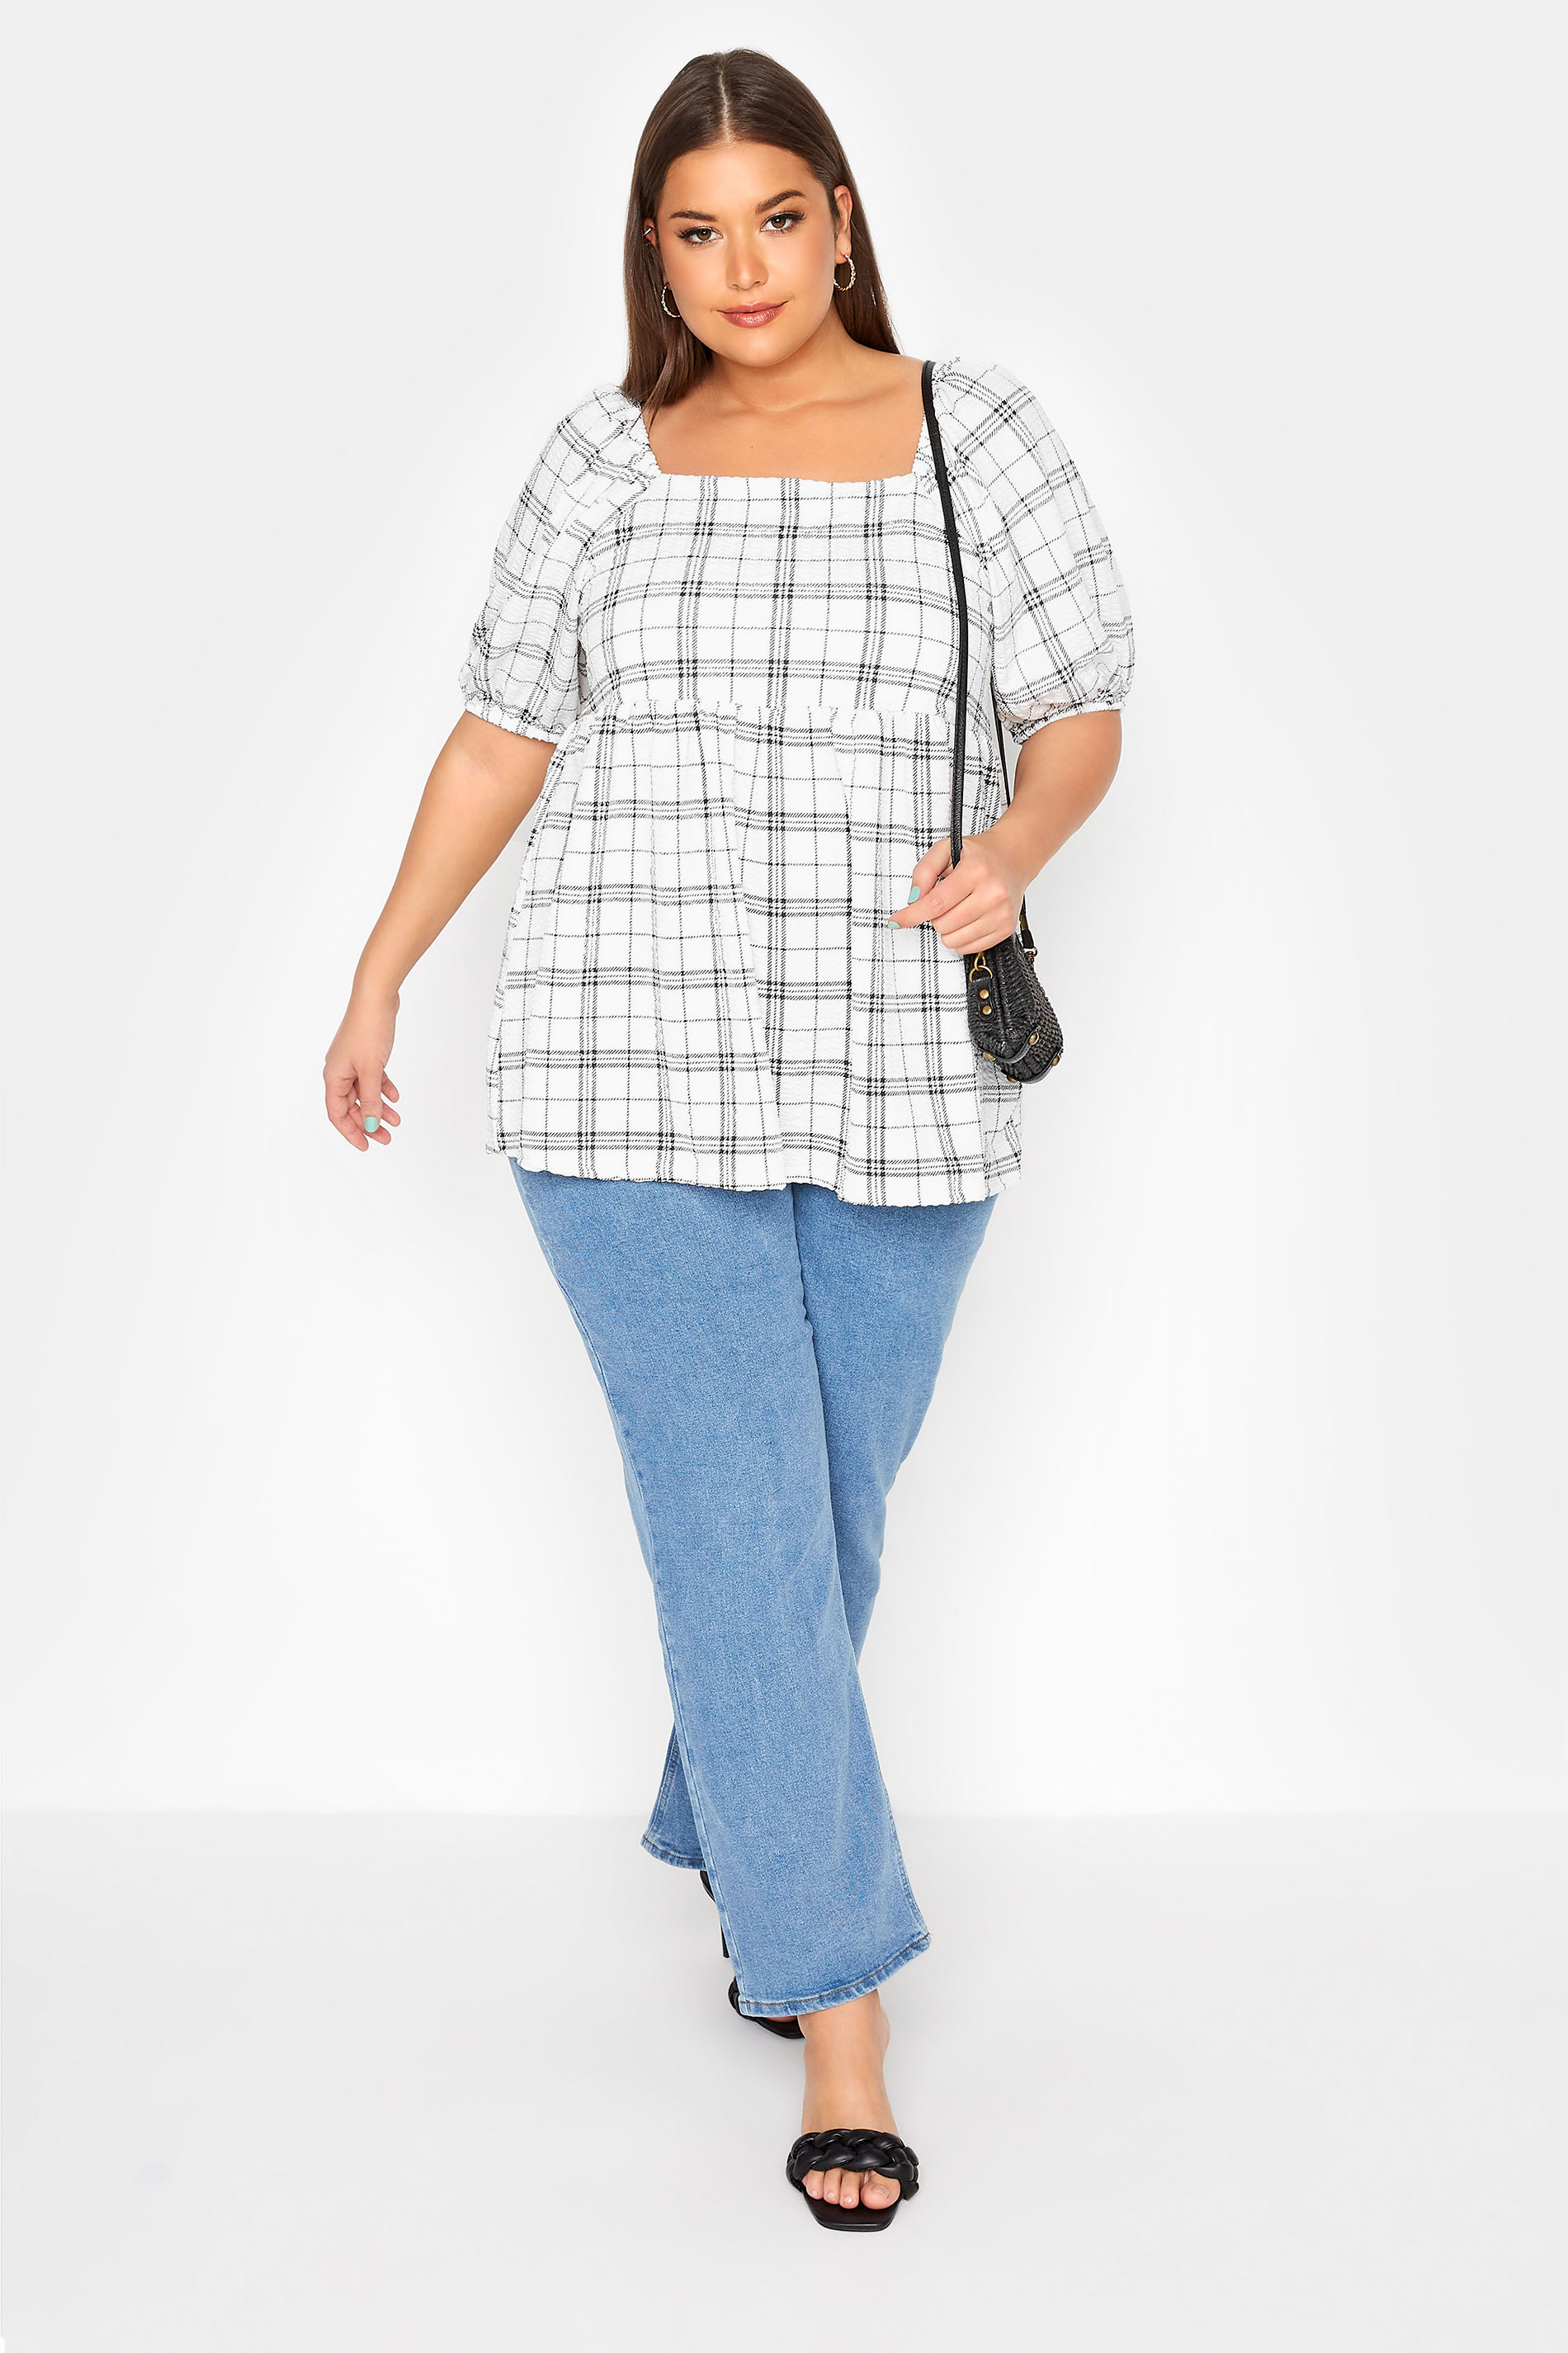 Grande taille  Tops Grande taille  Tops Casual | LIMITED COLLECTION - Top Blanc Milkmaid Smocké à Carreaux - BF70895